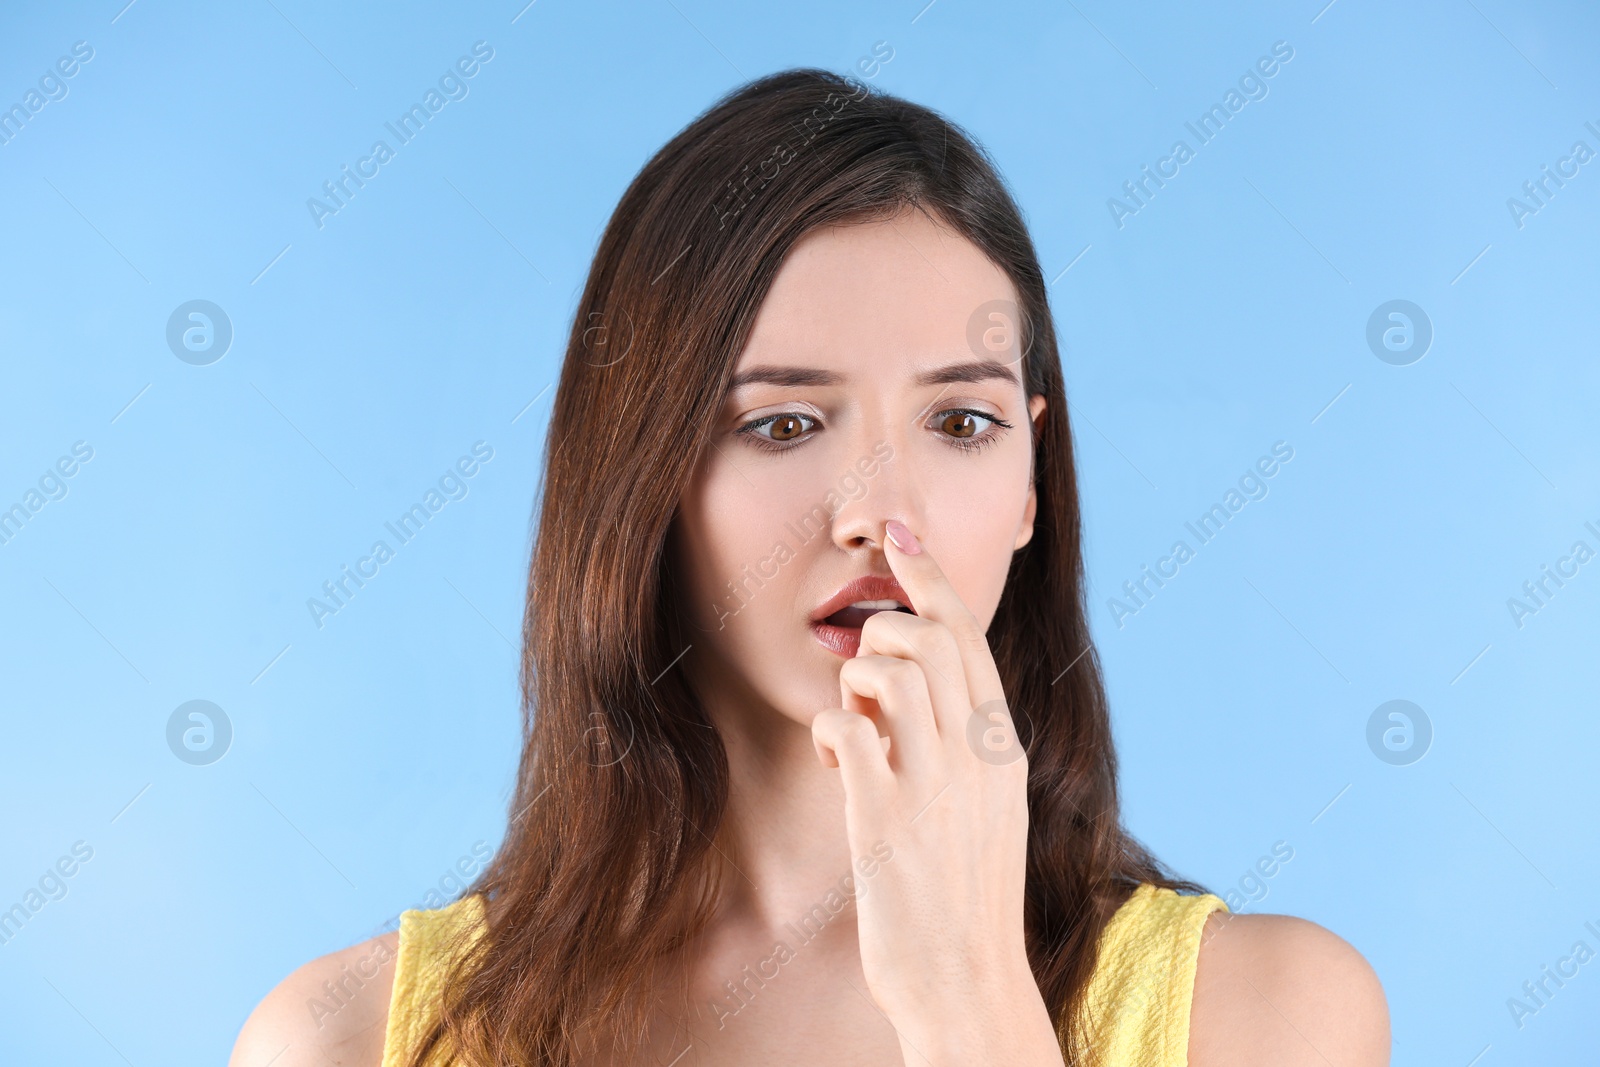 Photo of Teenage girl with acne problem against color background